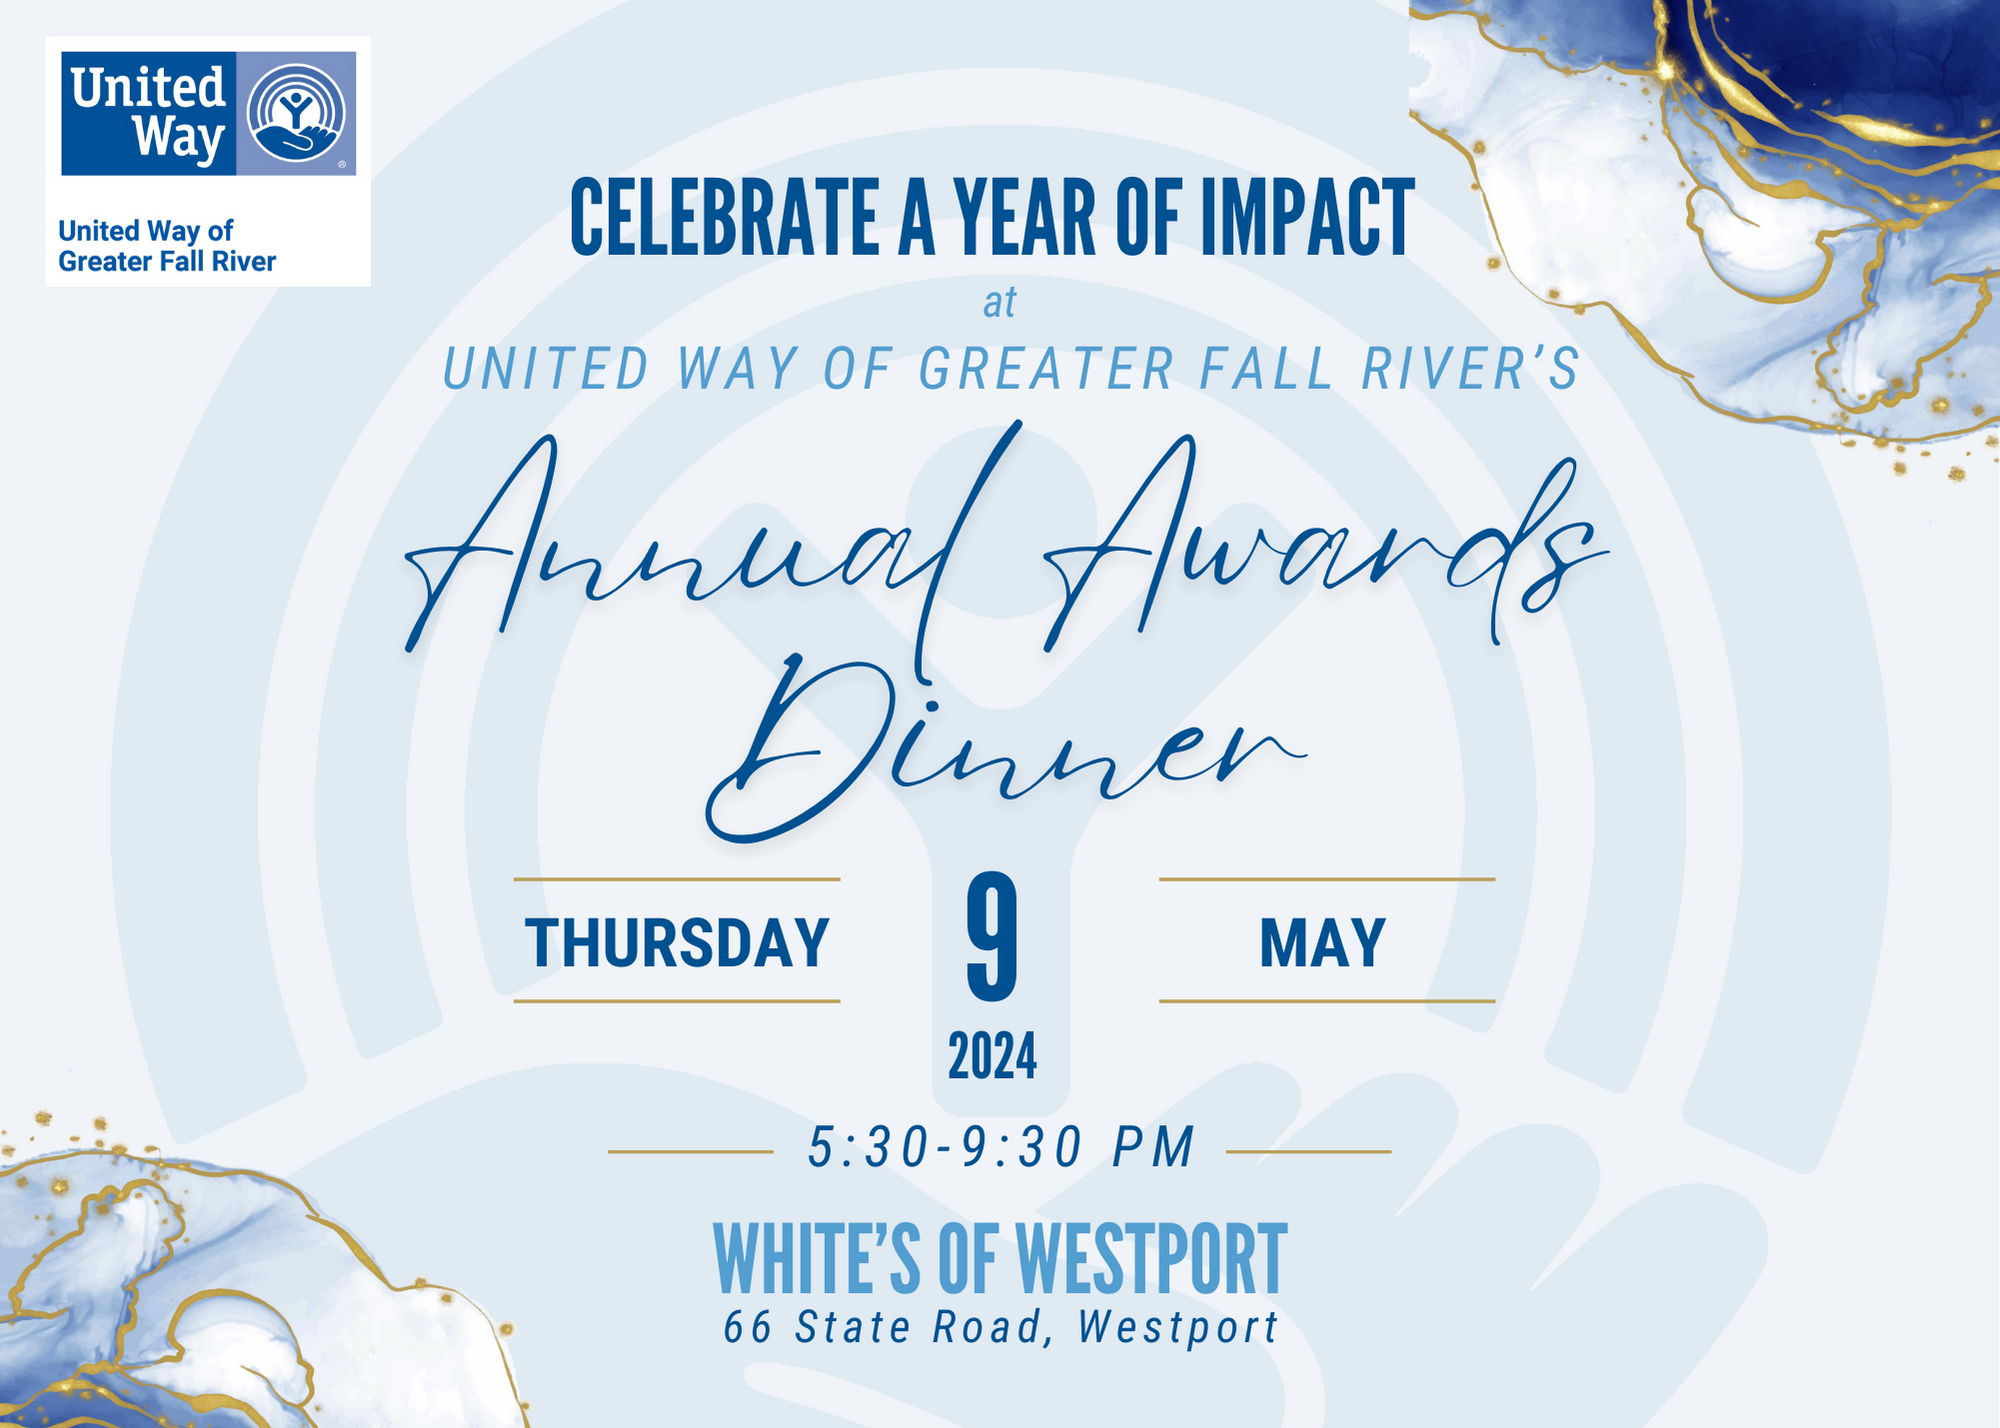 United Way of Greater Fall River's Annual Awards Dinner invitation